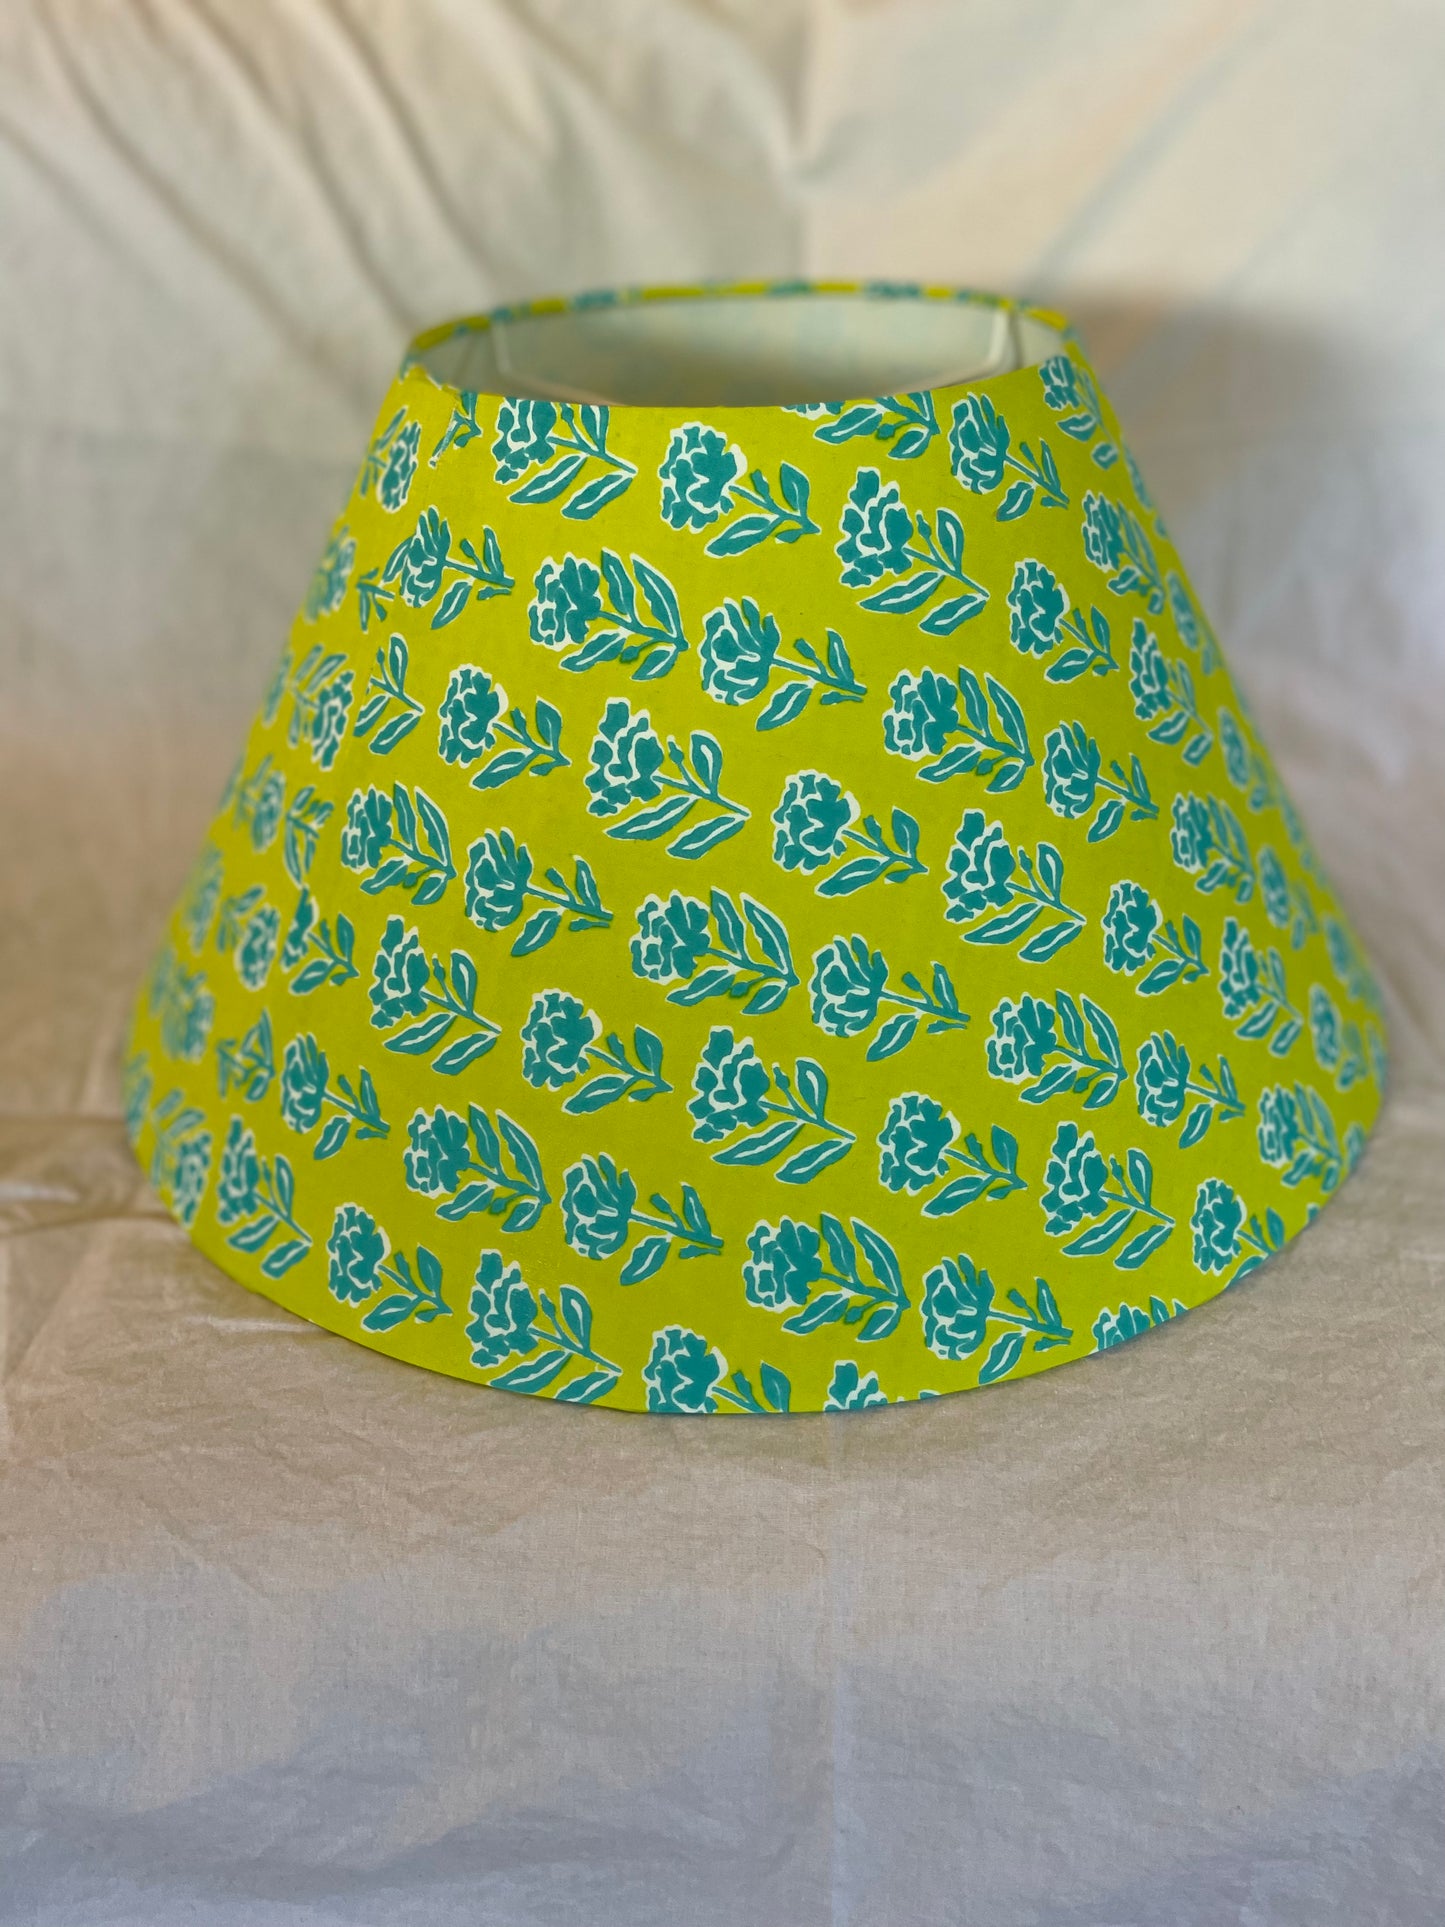 Large Conical Lampshade. Indian Block Print from Jaipur. Lime Green with Teal Floral.